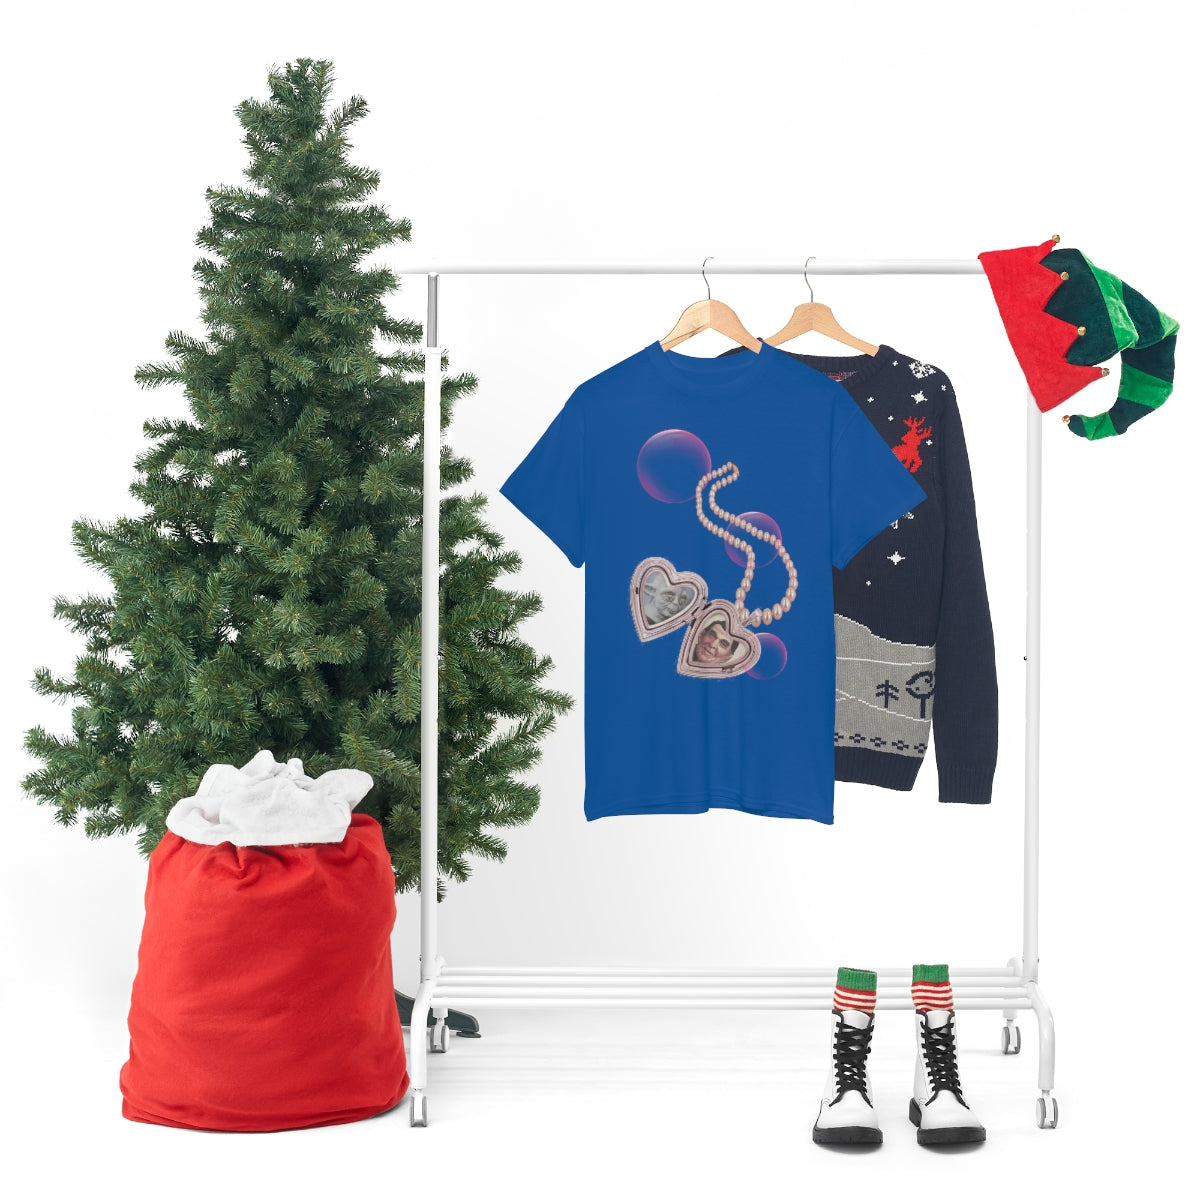 All Be Home for Christmas T-Shirt